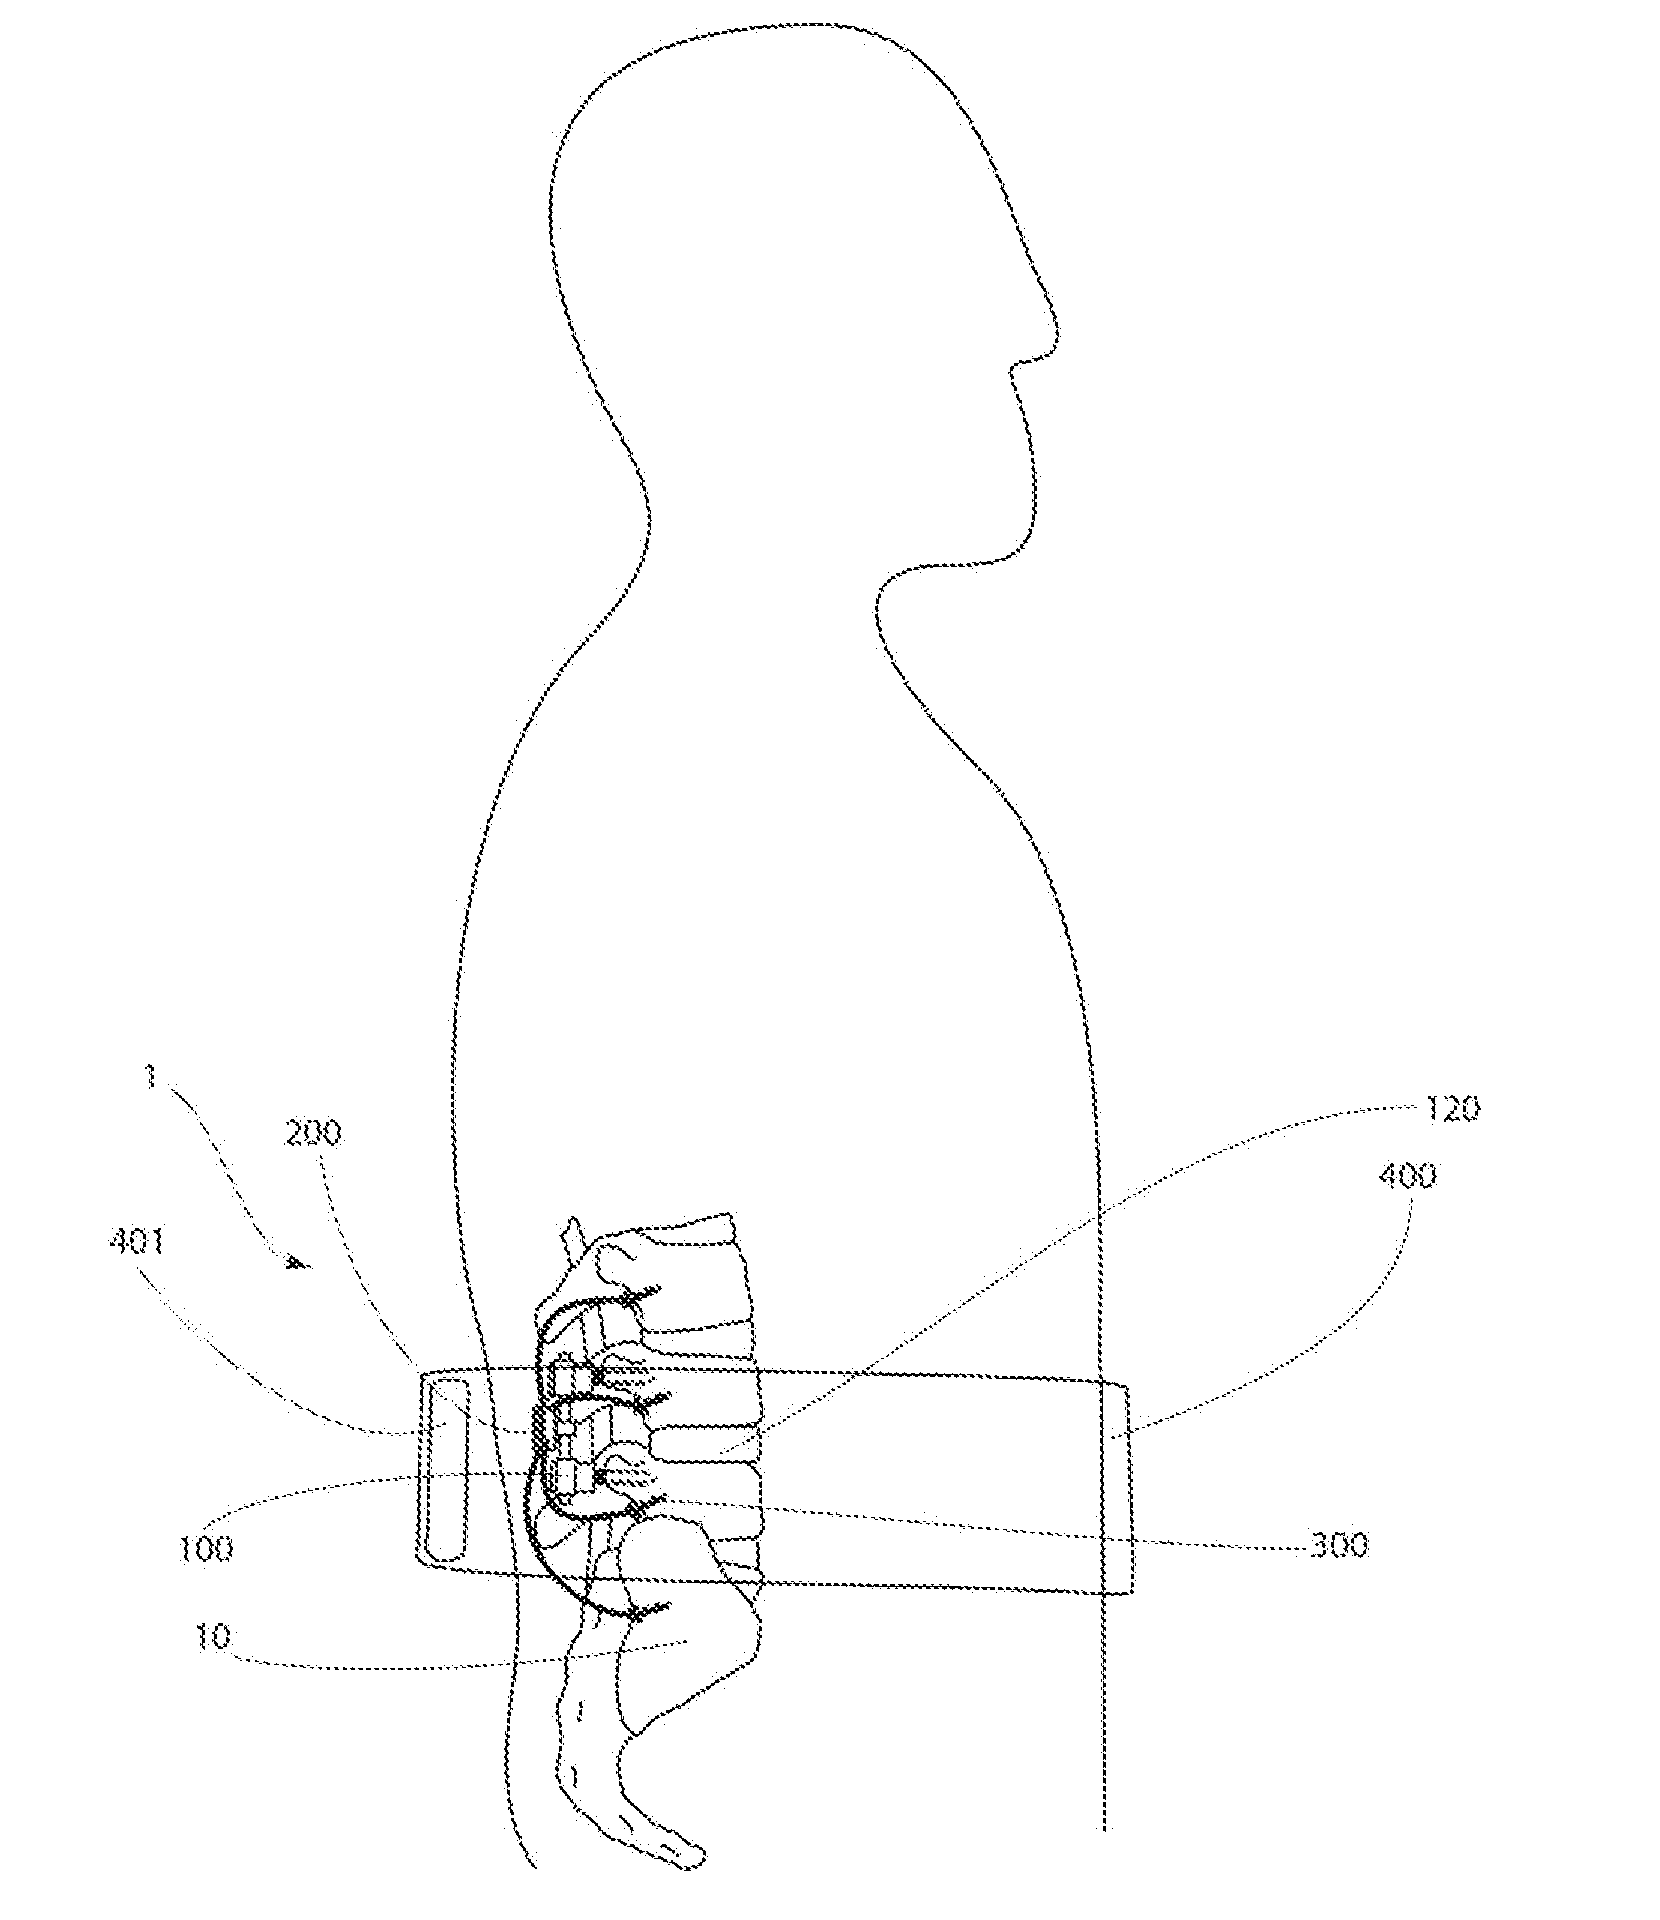 Method and Apparatus for an Implantable Inertial-Based Sensing System for Real-Time, In Vivo Detection of Spinal Pseudarthrosis and Adjacent Segment Motion